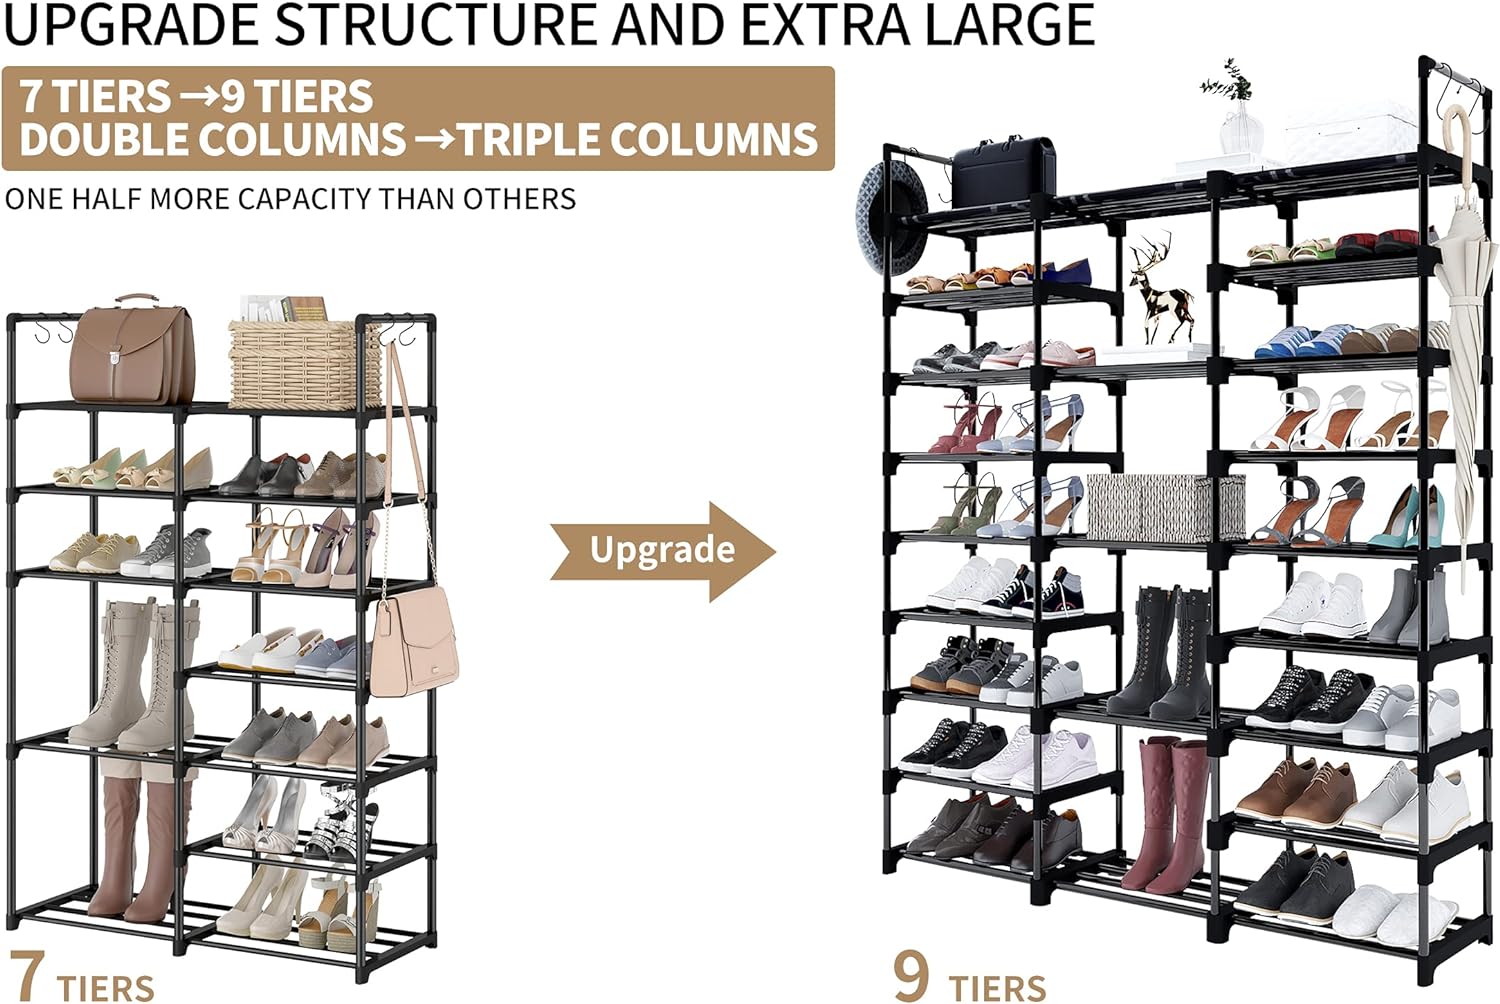 9 Tiers Metal Shoe Rack Organizer, 50-55 Pairs Large Tall Shoe Storage,Shoe  Holder,Shoe Stand,Vertical Free Standing Shoe Shelf,Heavy Duty Boot Rack  for Entryway, Closet, Garage, Bedroom